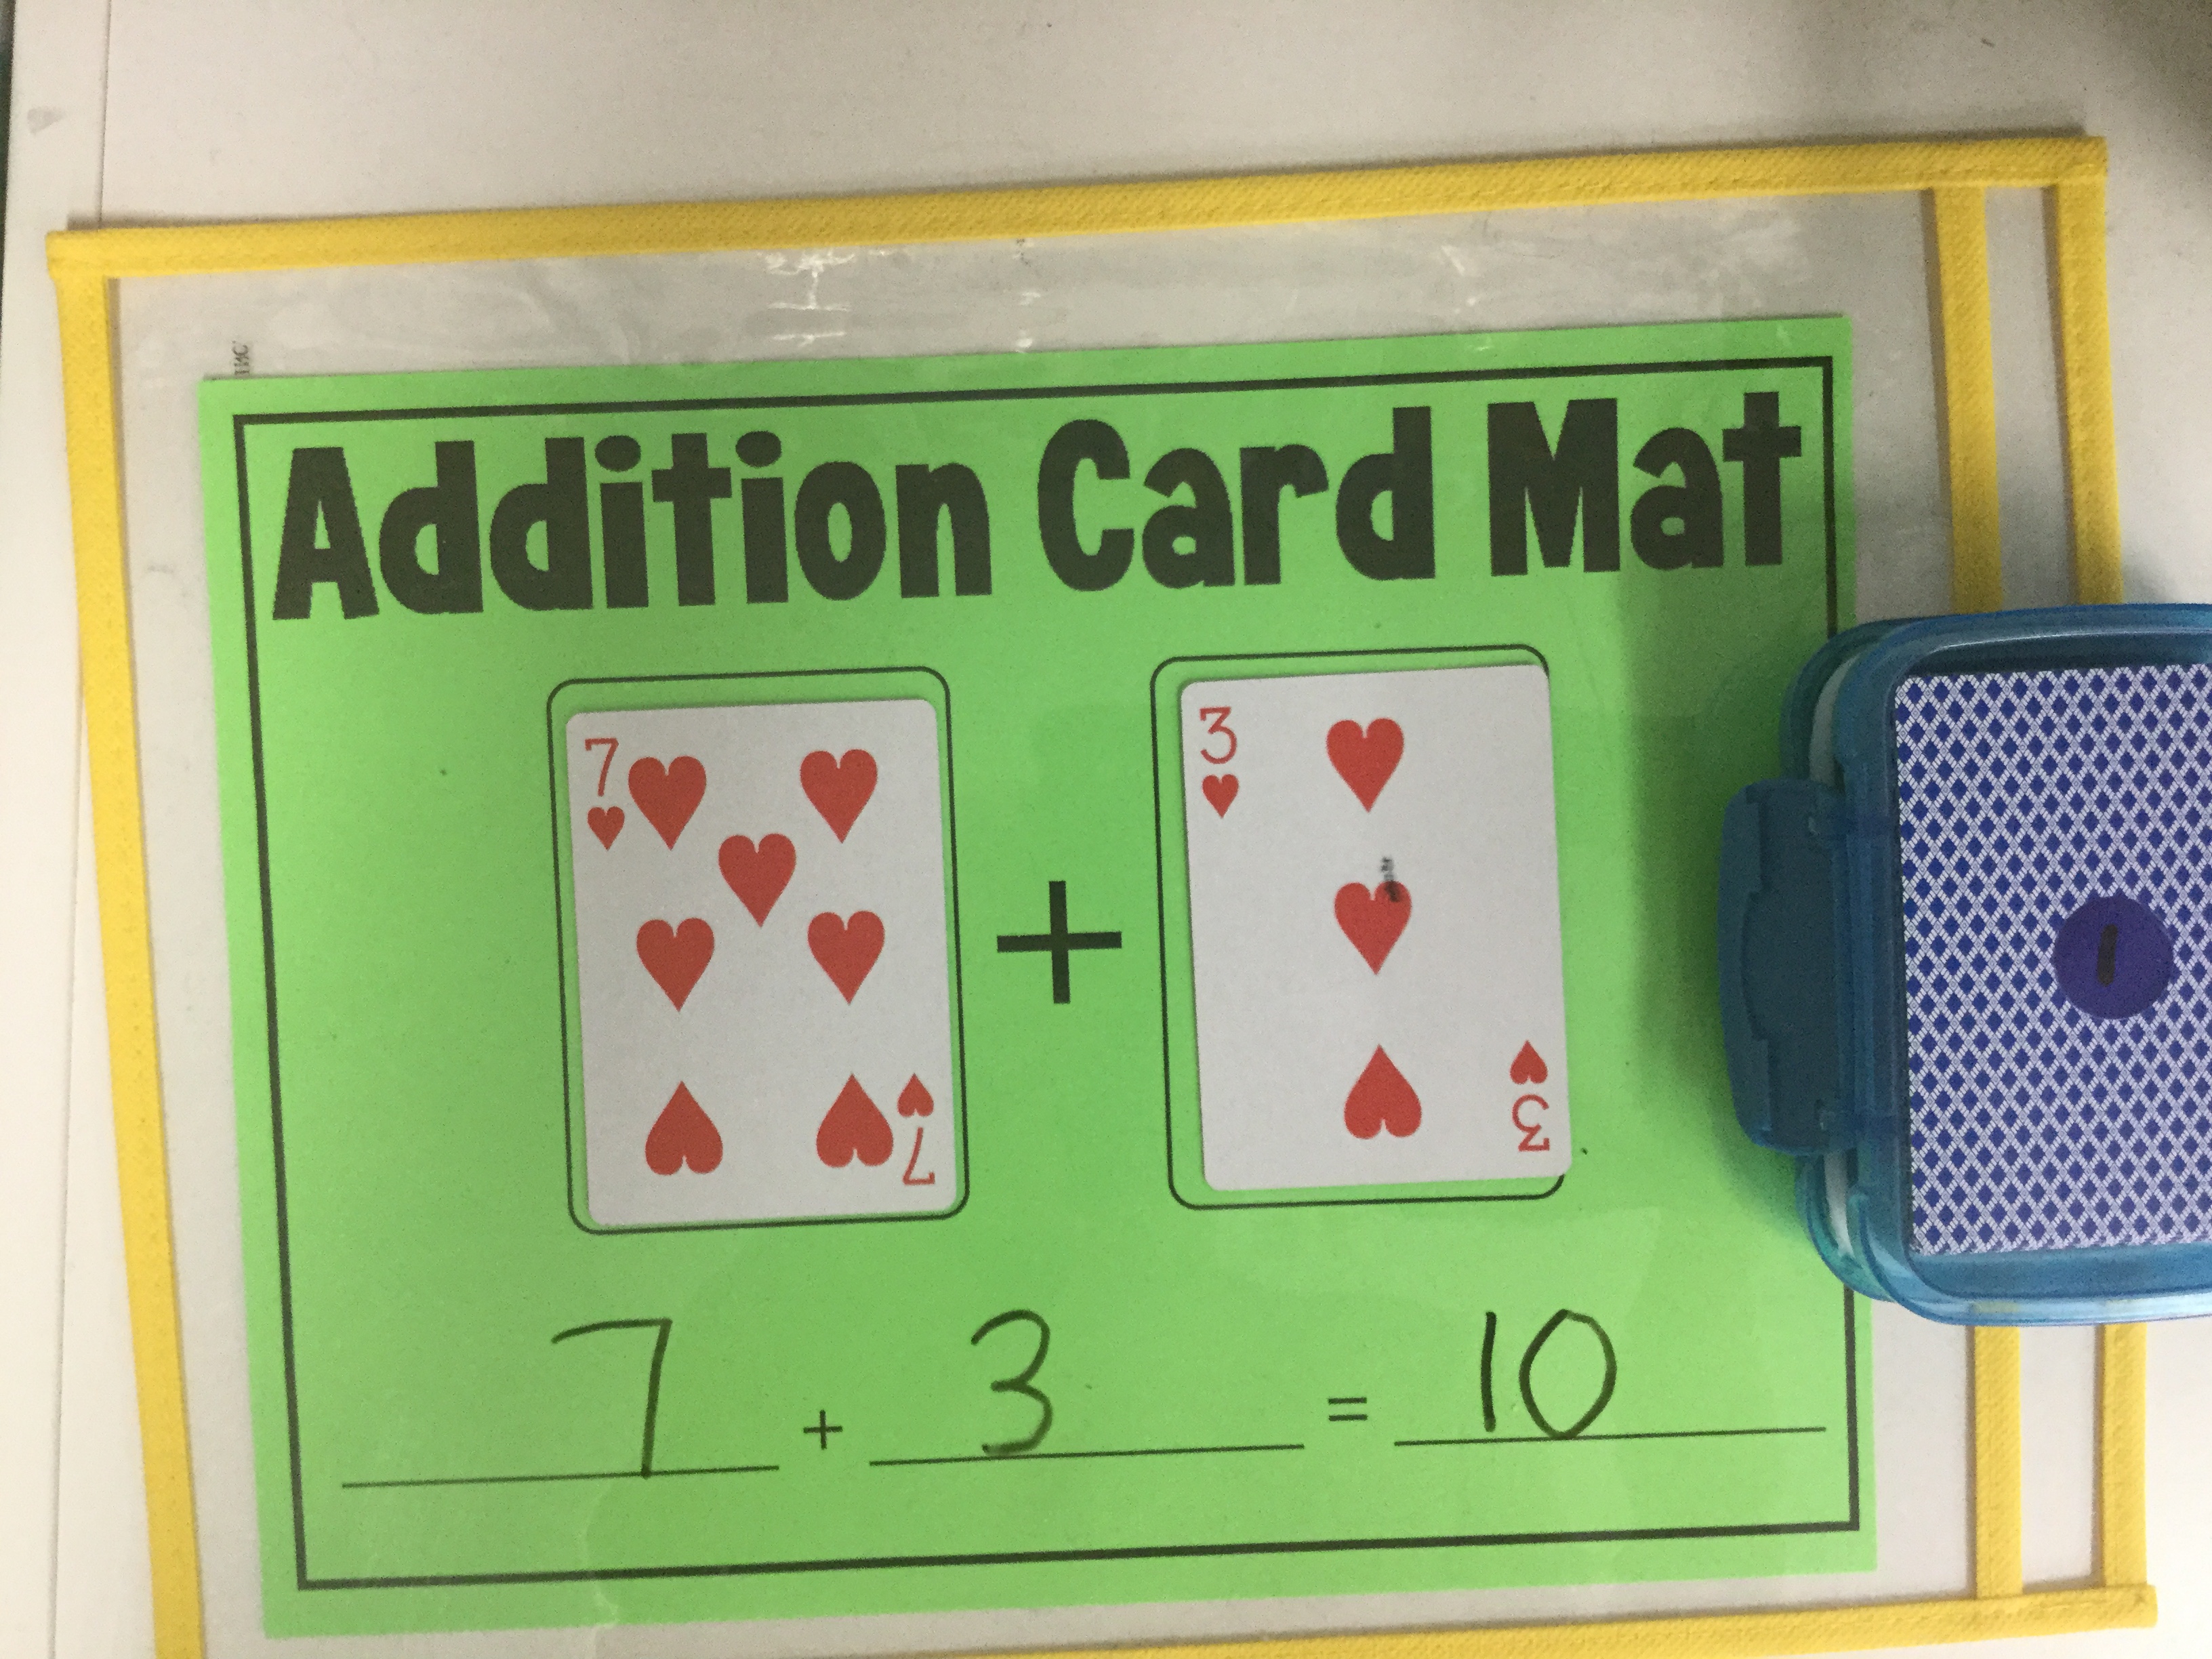 Here is an example. Students can complete this activity in a center or a rotation during math.